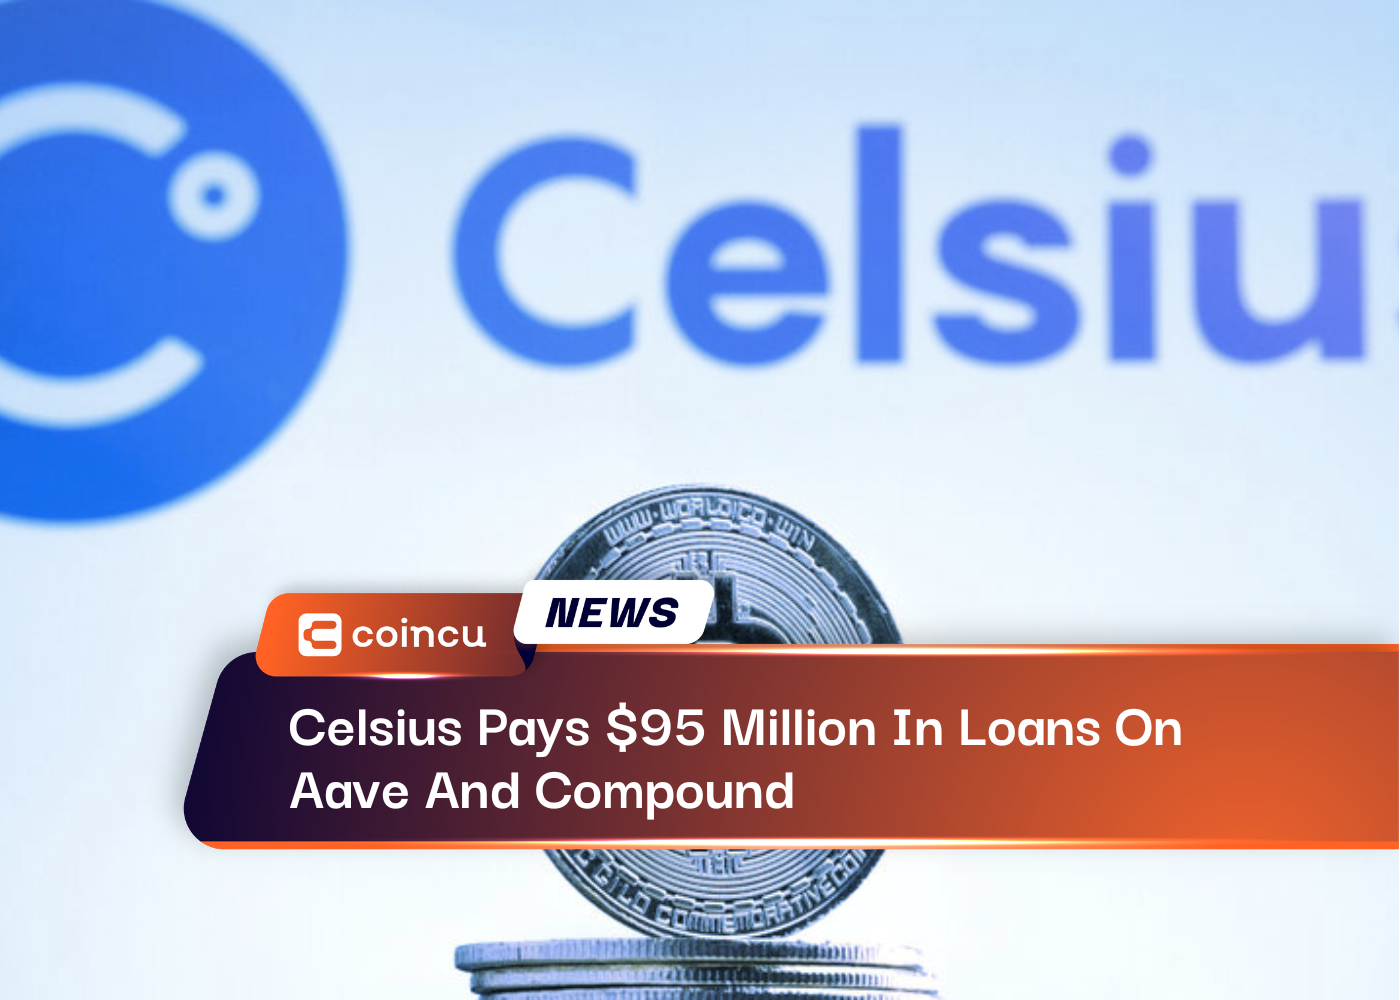 Celsius Pays $95 Million In Loans On Aave And Compound